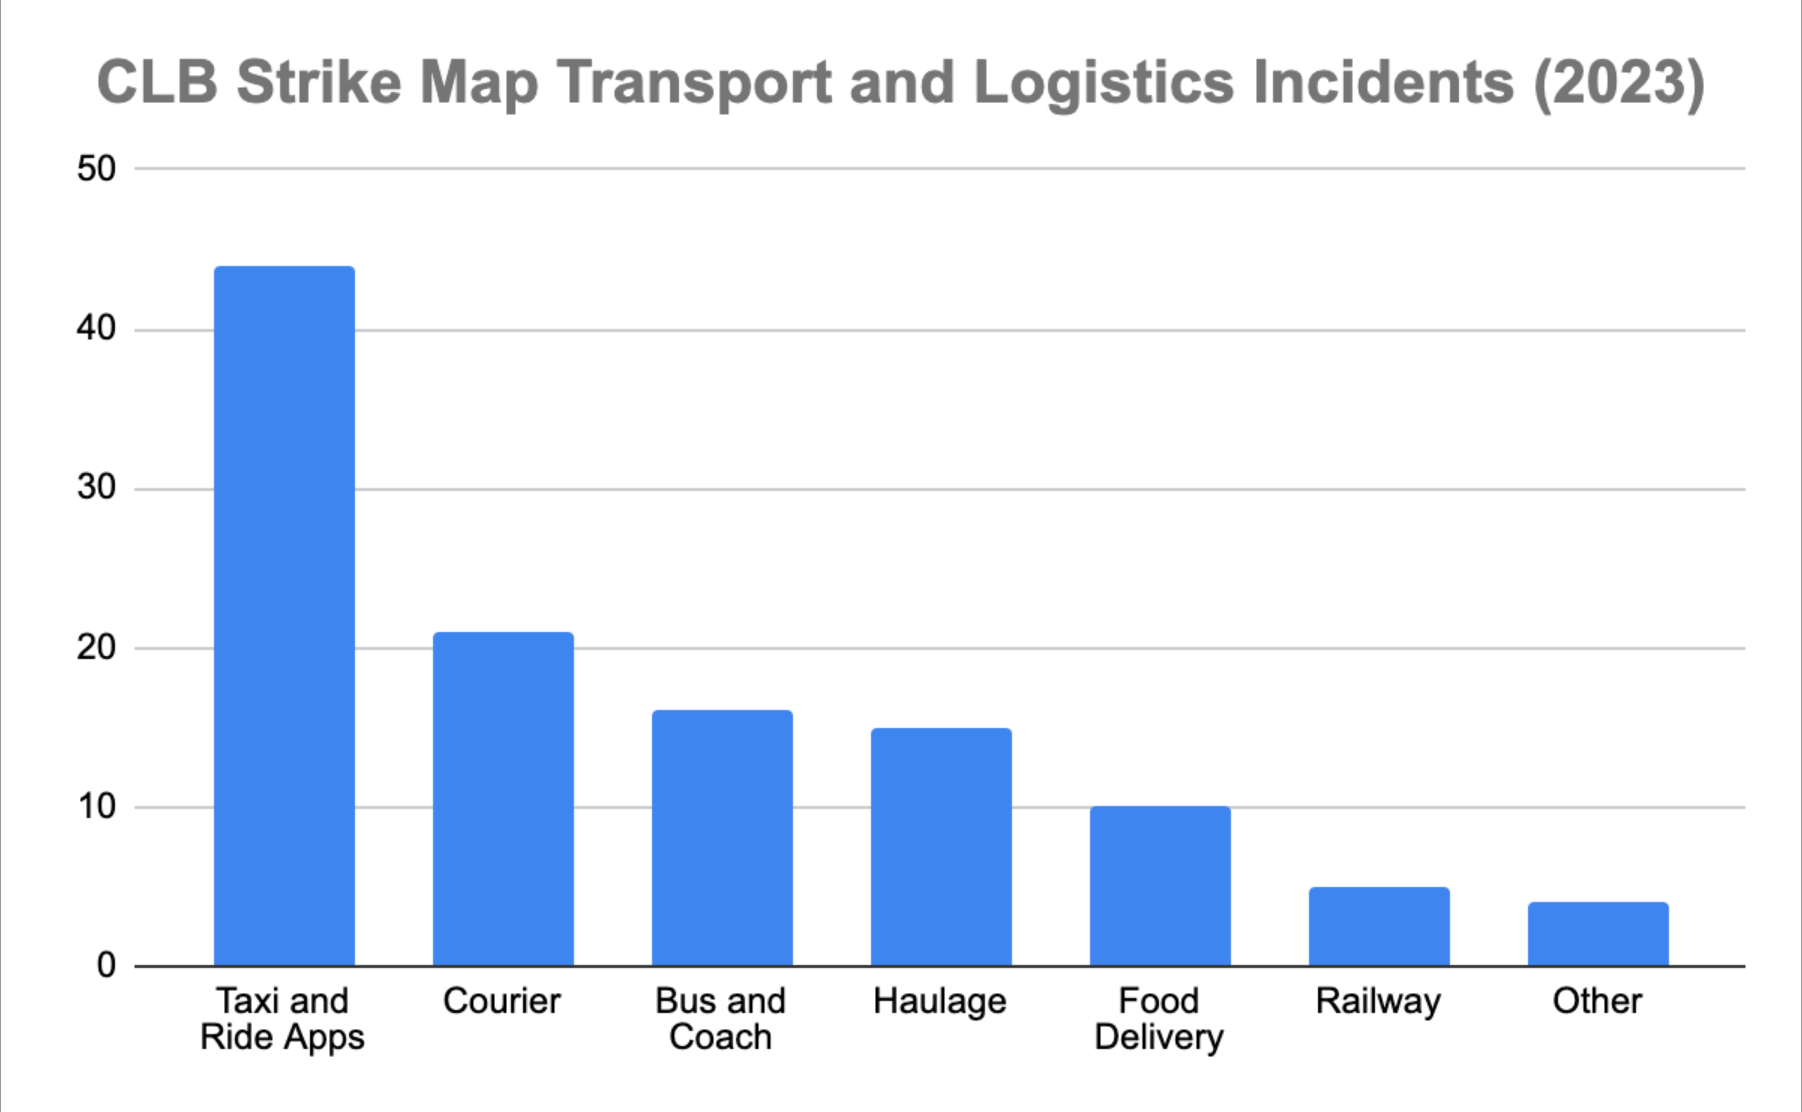 CLB Strike Map data in transport and logistics industry by subsector (2023)